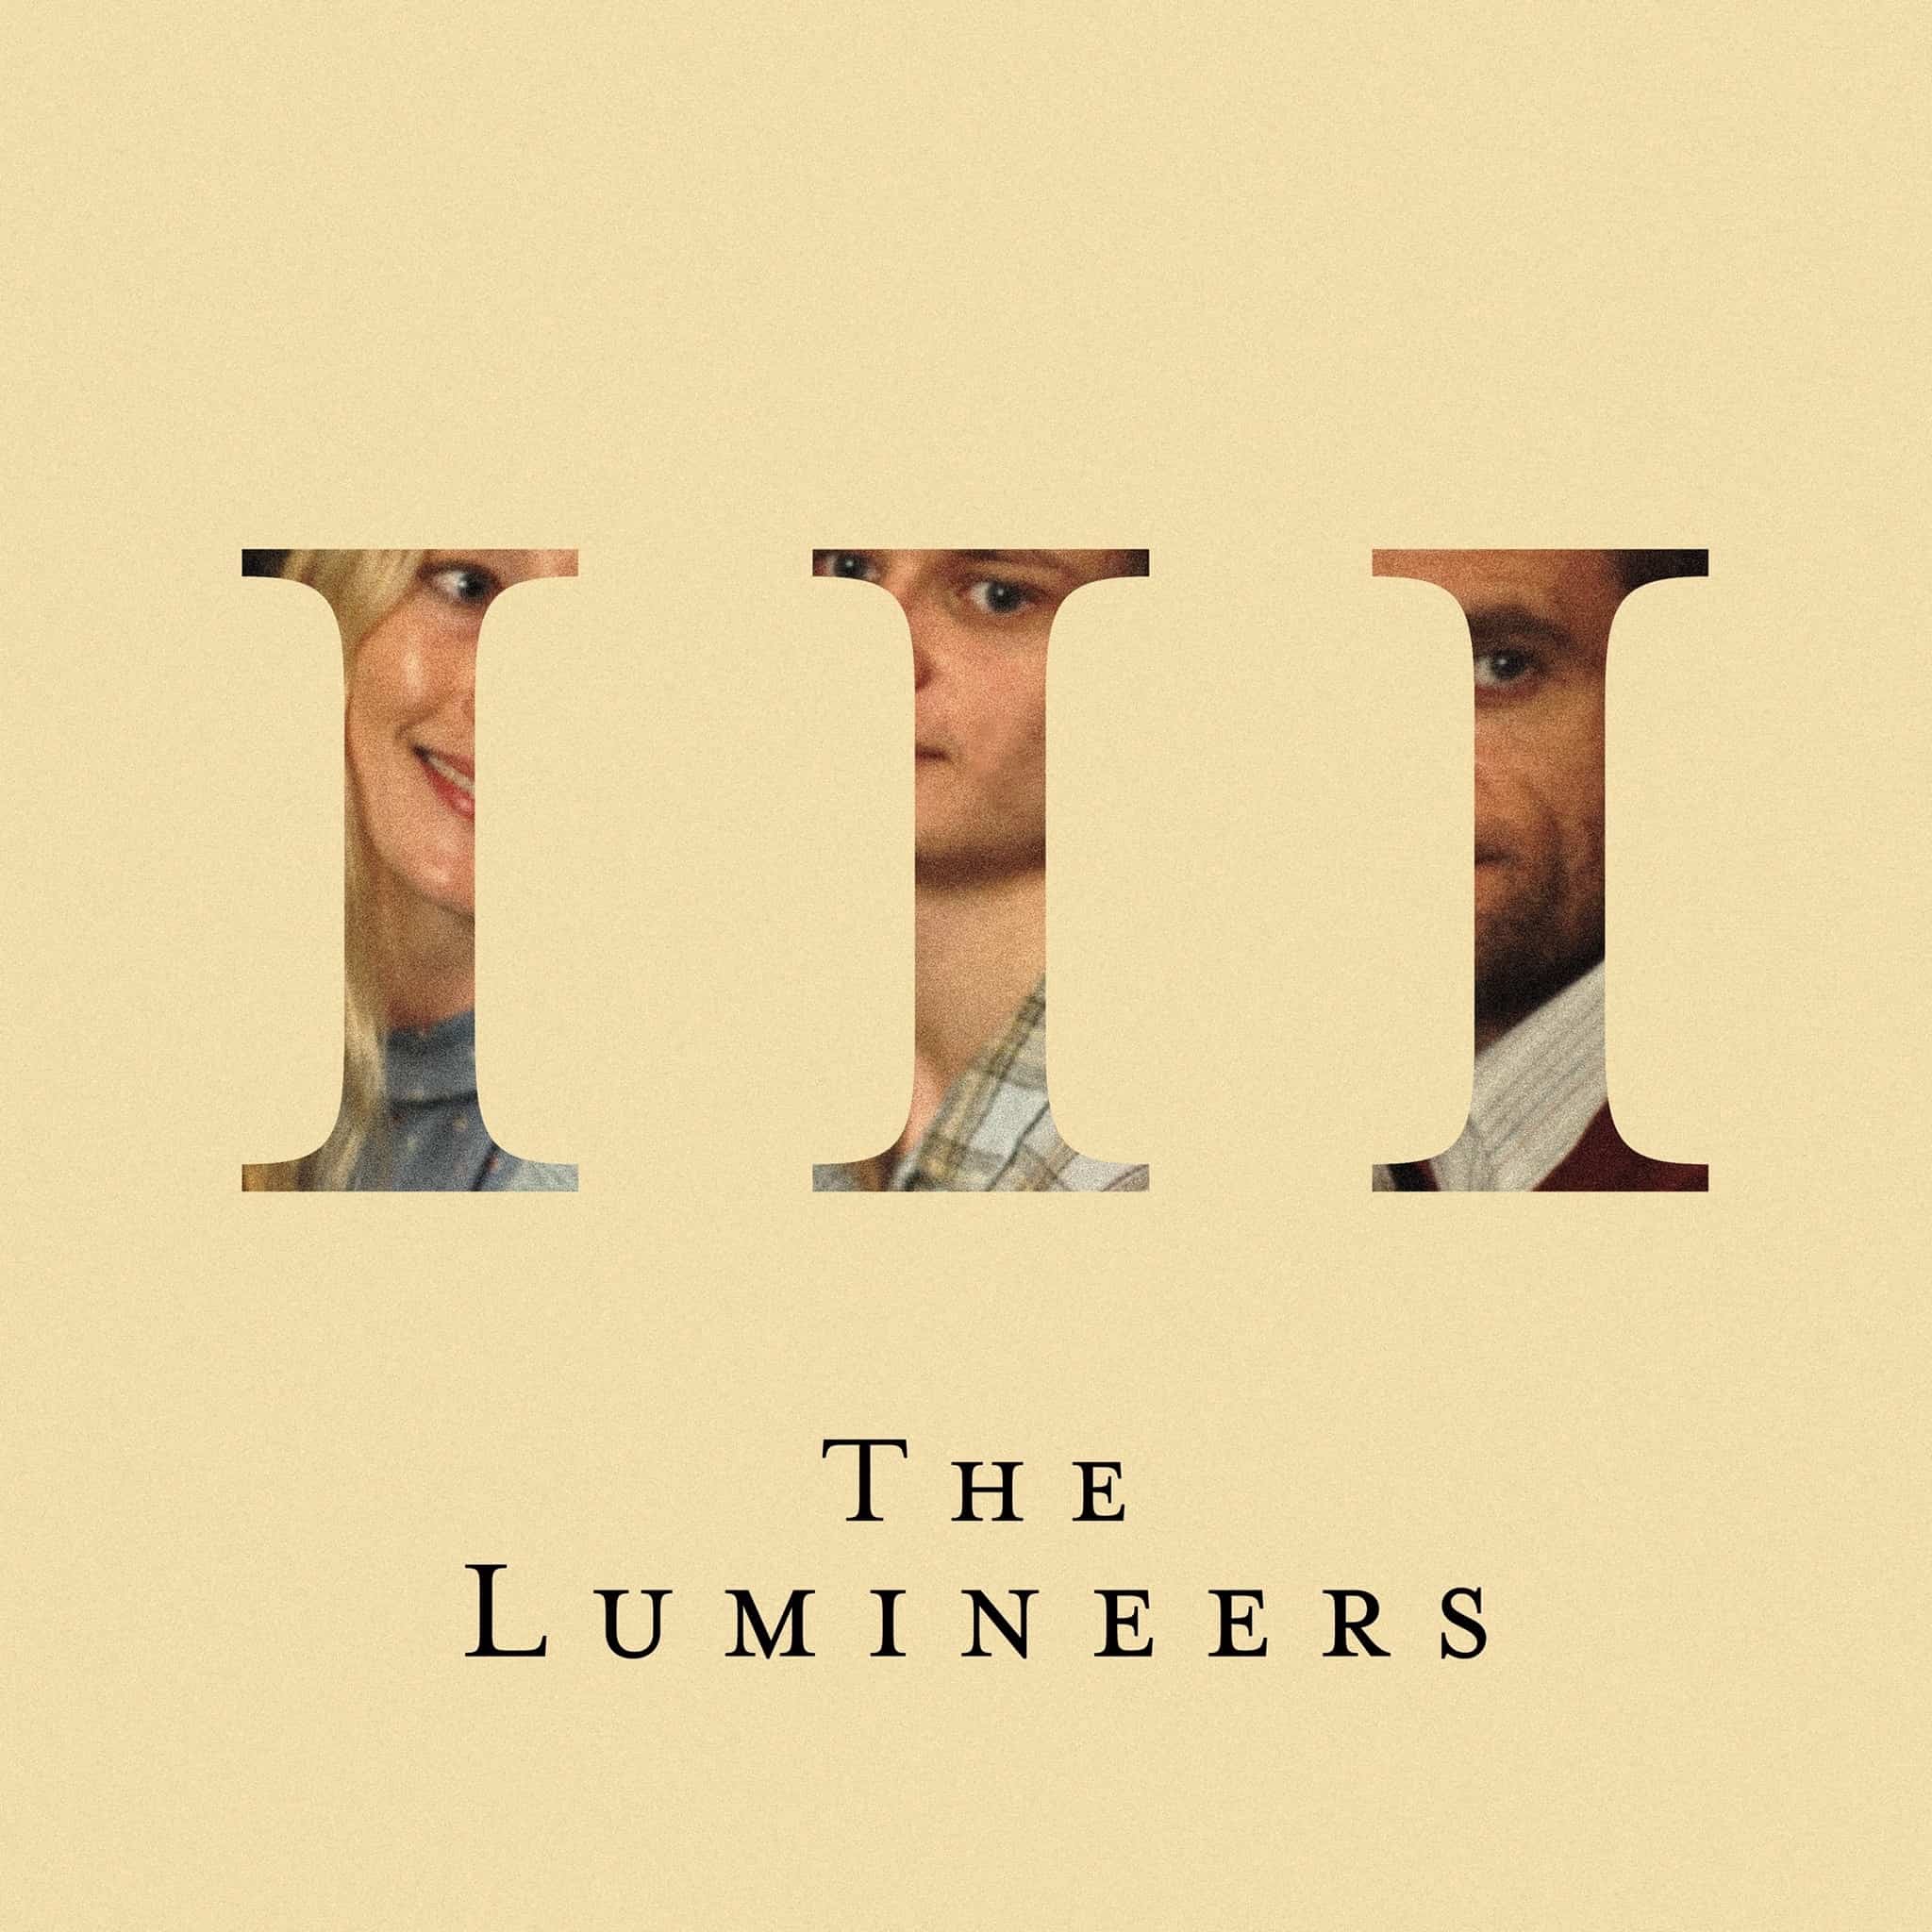 Family, Addiction, and Raw Storytelling: An Interview with The Lumineers